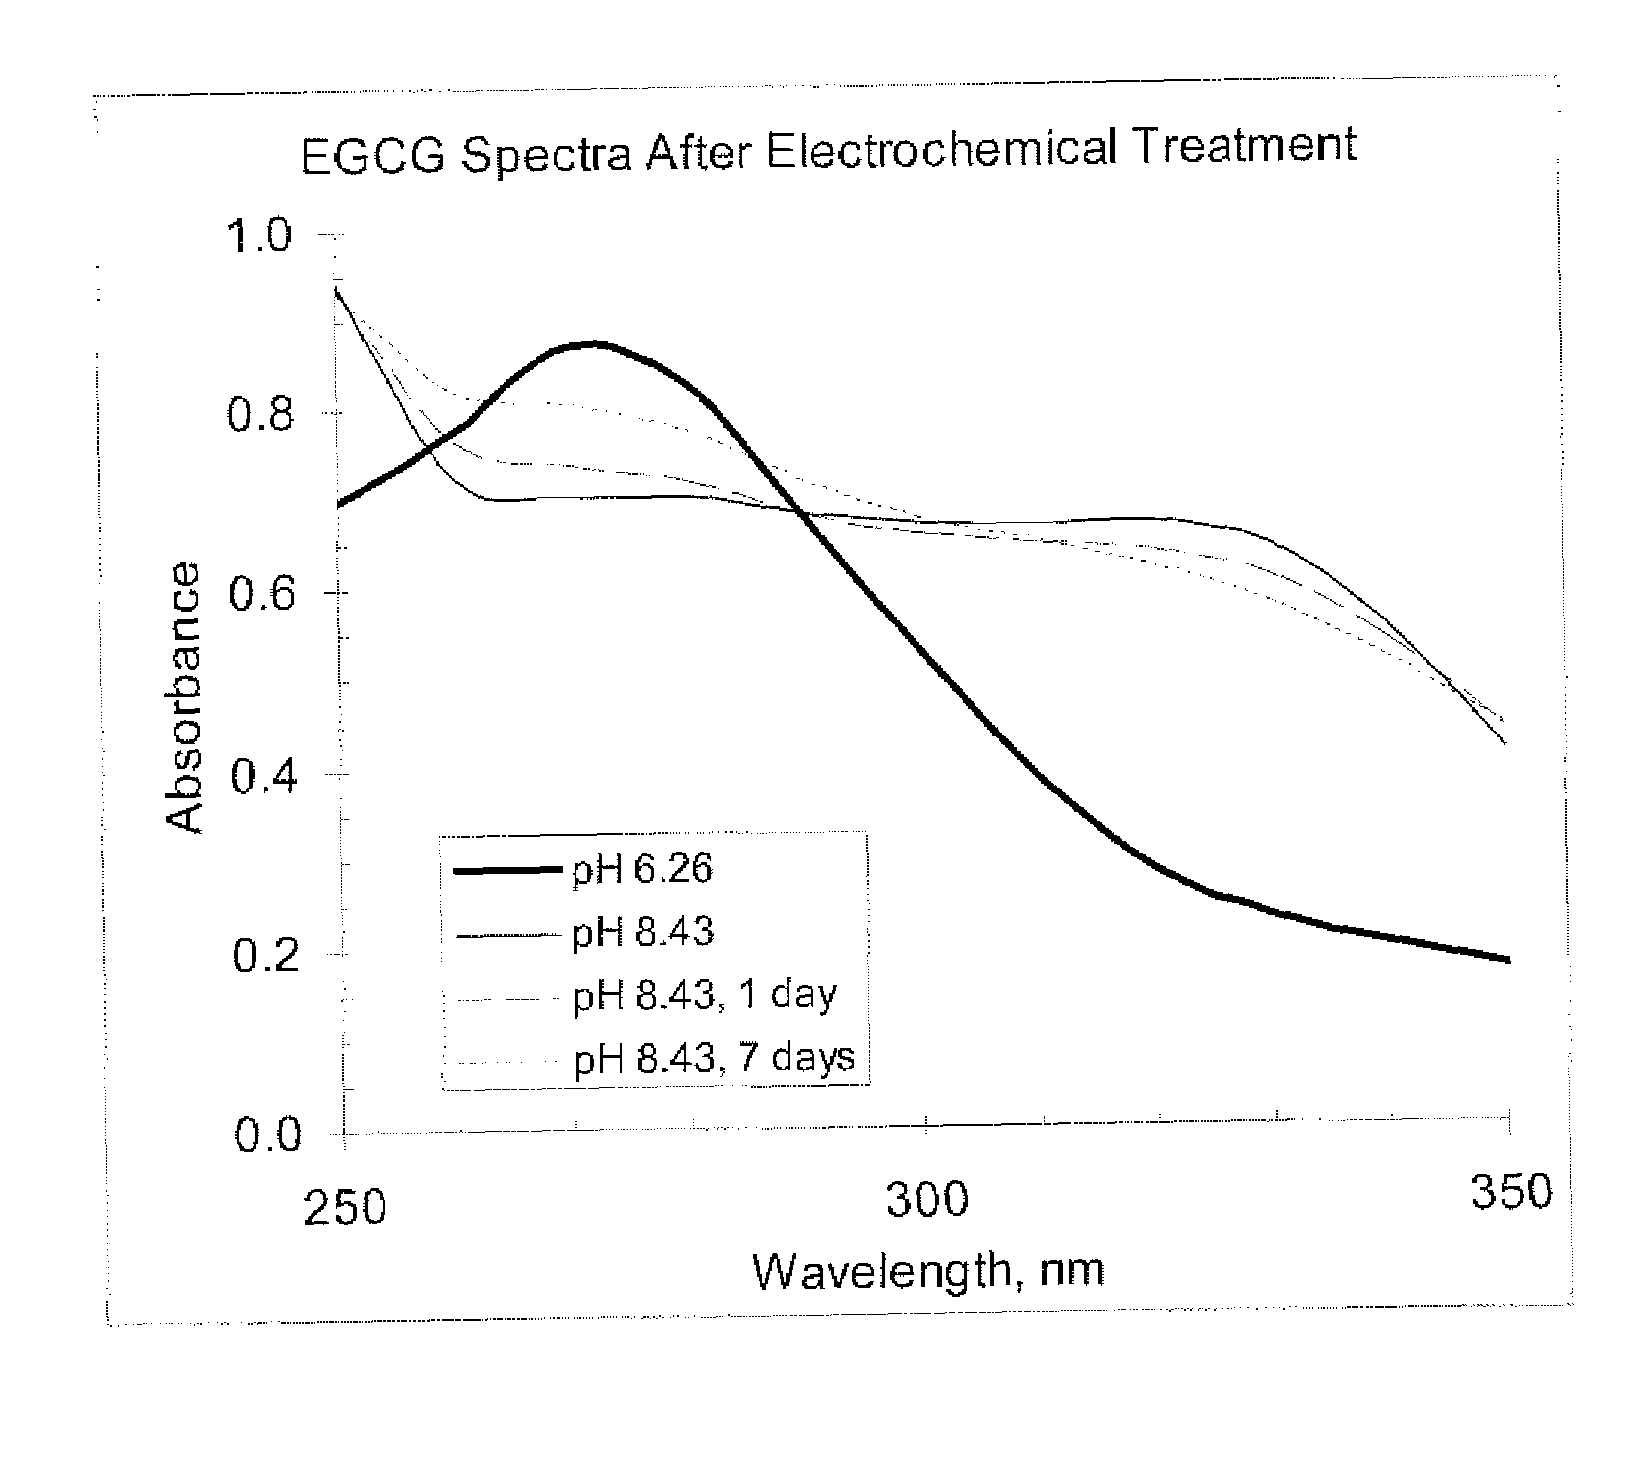 Electrochemical methods for redox control to preserve, stabilize and activate compounds